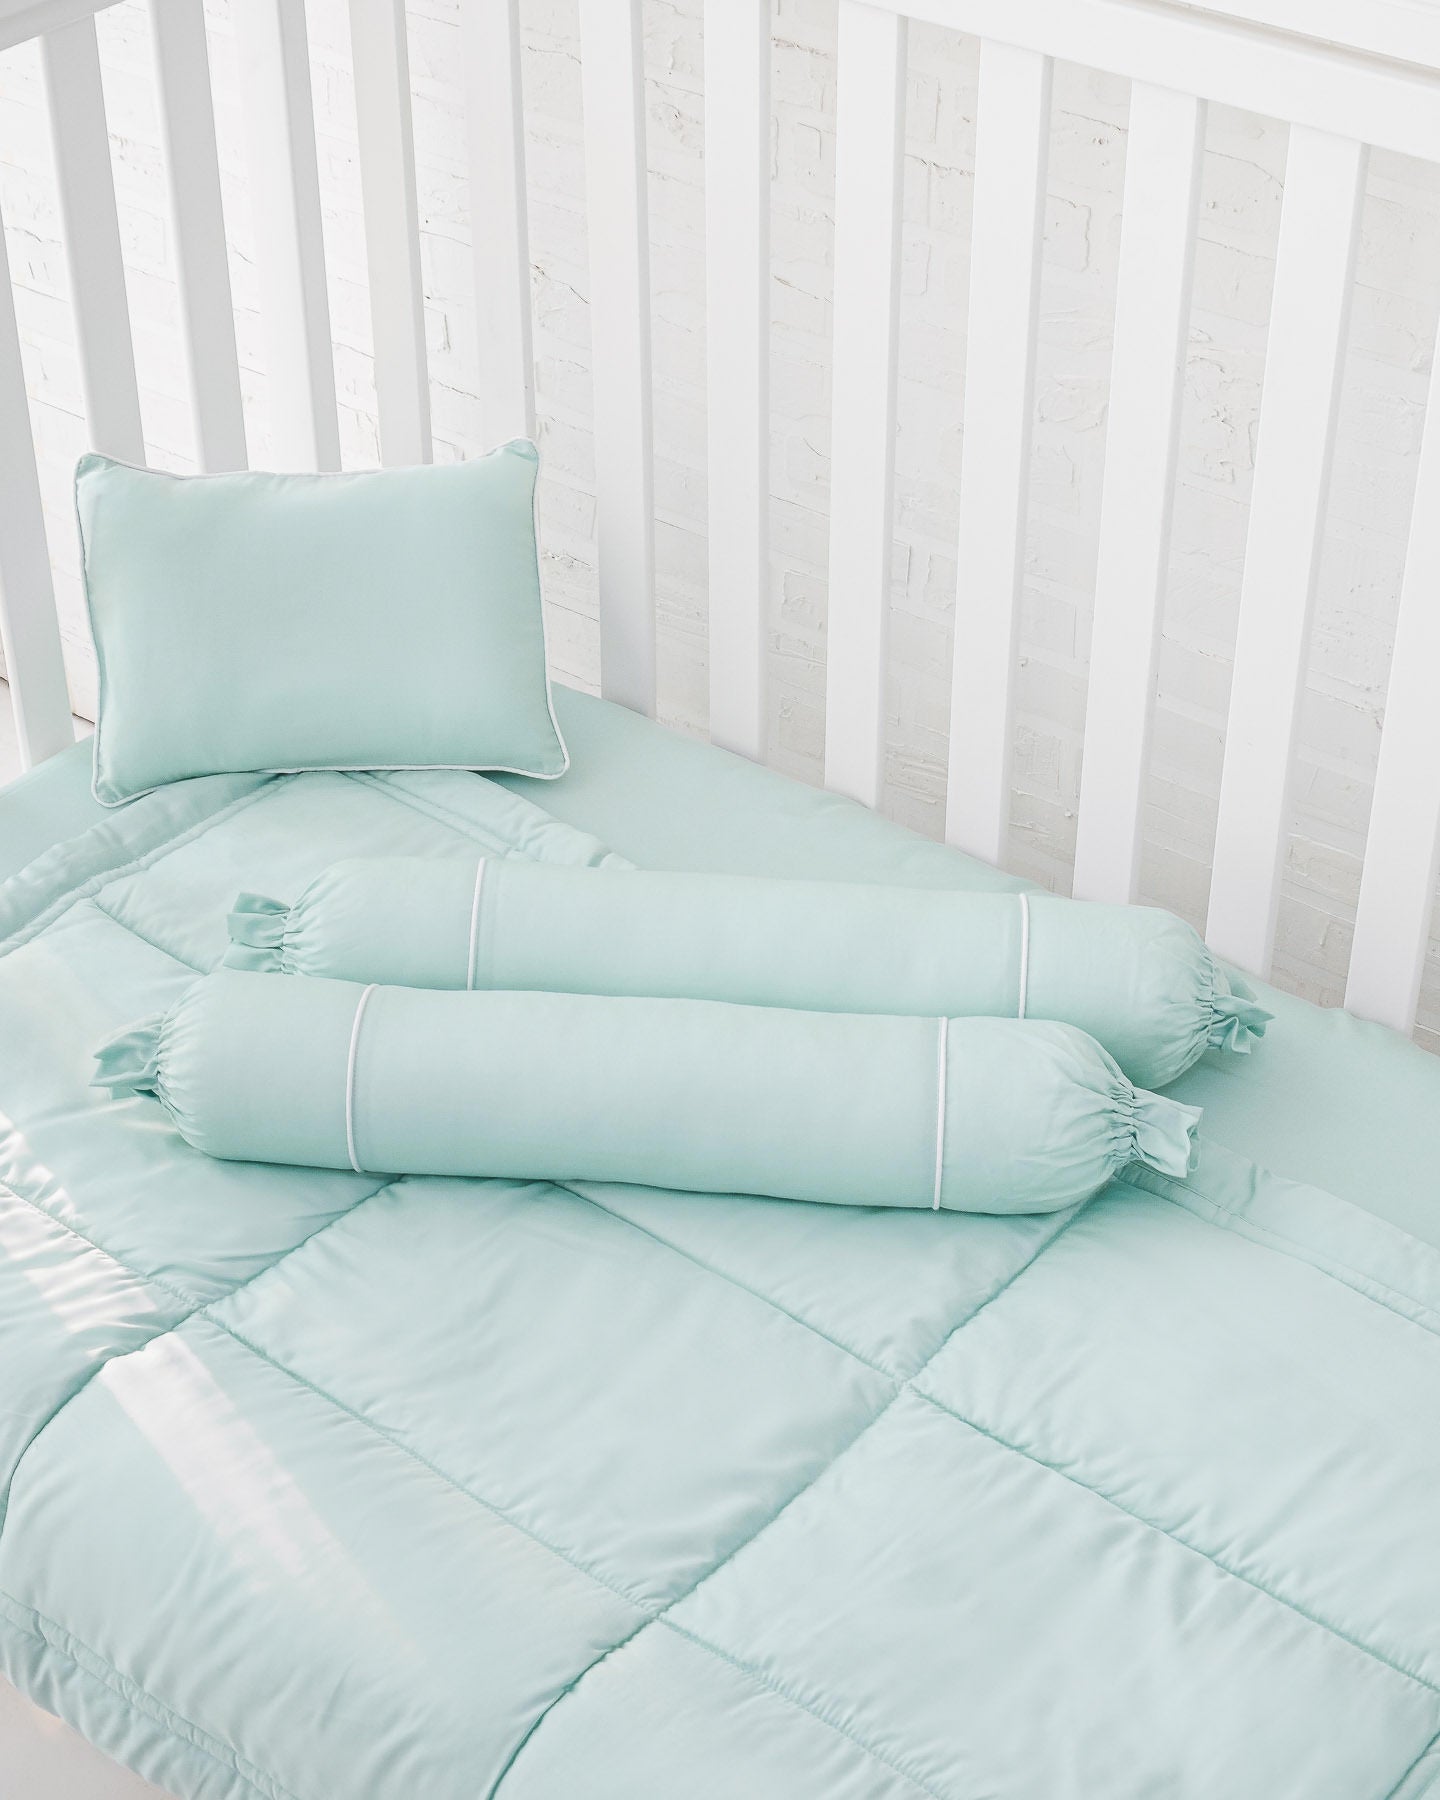 White crib with mint green organic bamboo lyocell baby bedding (baby comforter set - 1 pillowcase, 2 bolstercases, 1 comforter; baby pillow set - 1 headshaping pillow, 2 bolsters; crib fitted sheet) 